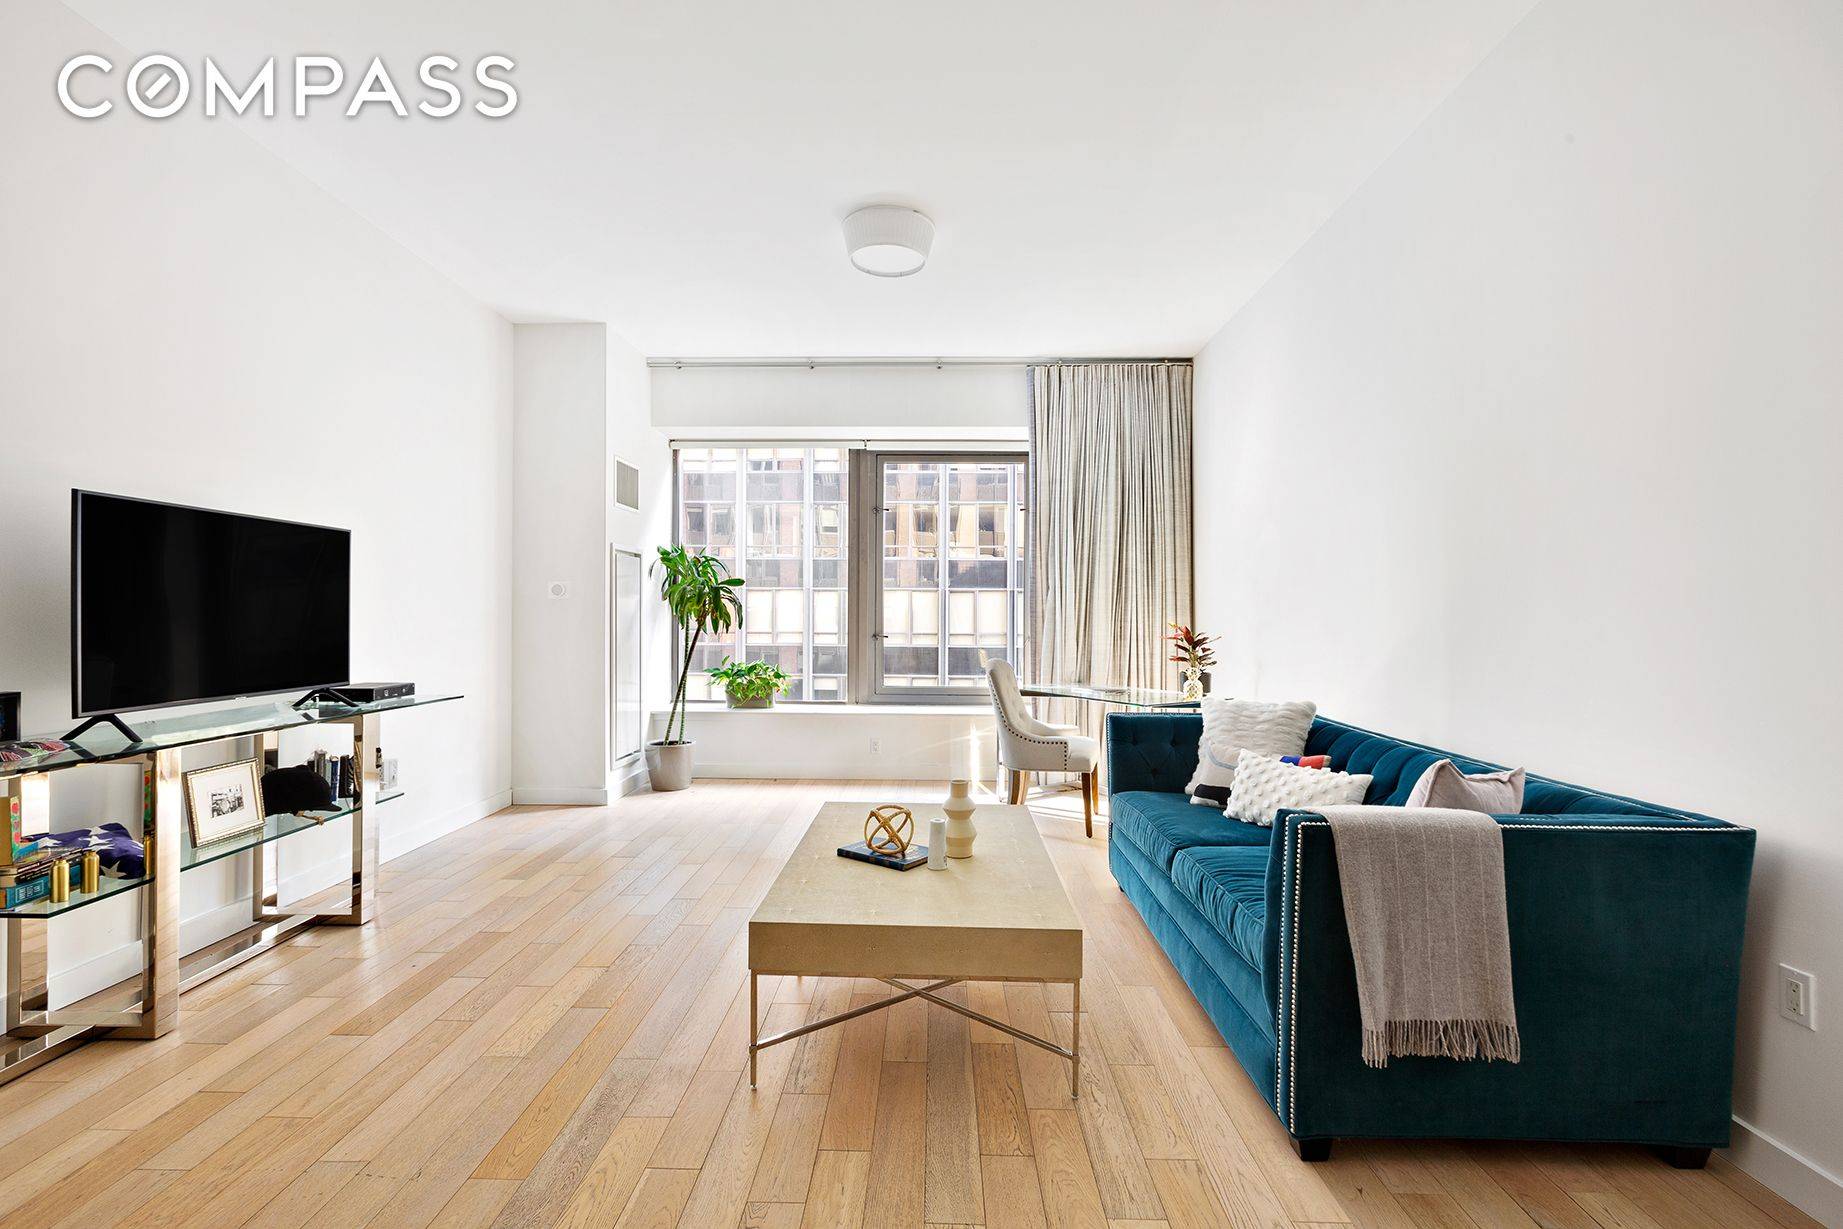 Spacious and open thanks to its loft like ten foot ceilings, this contemporary designer apartment sits on the 21st floor of the coveted 75 Wall Street building, located just a ...